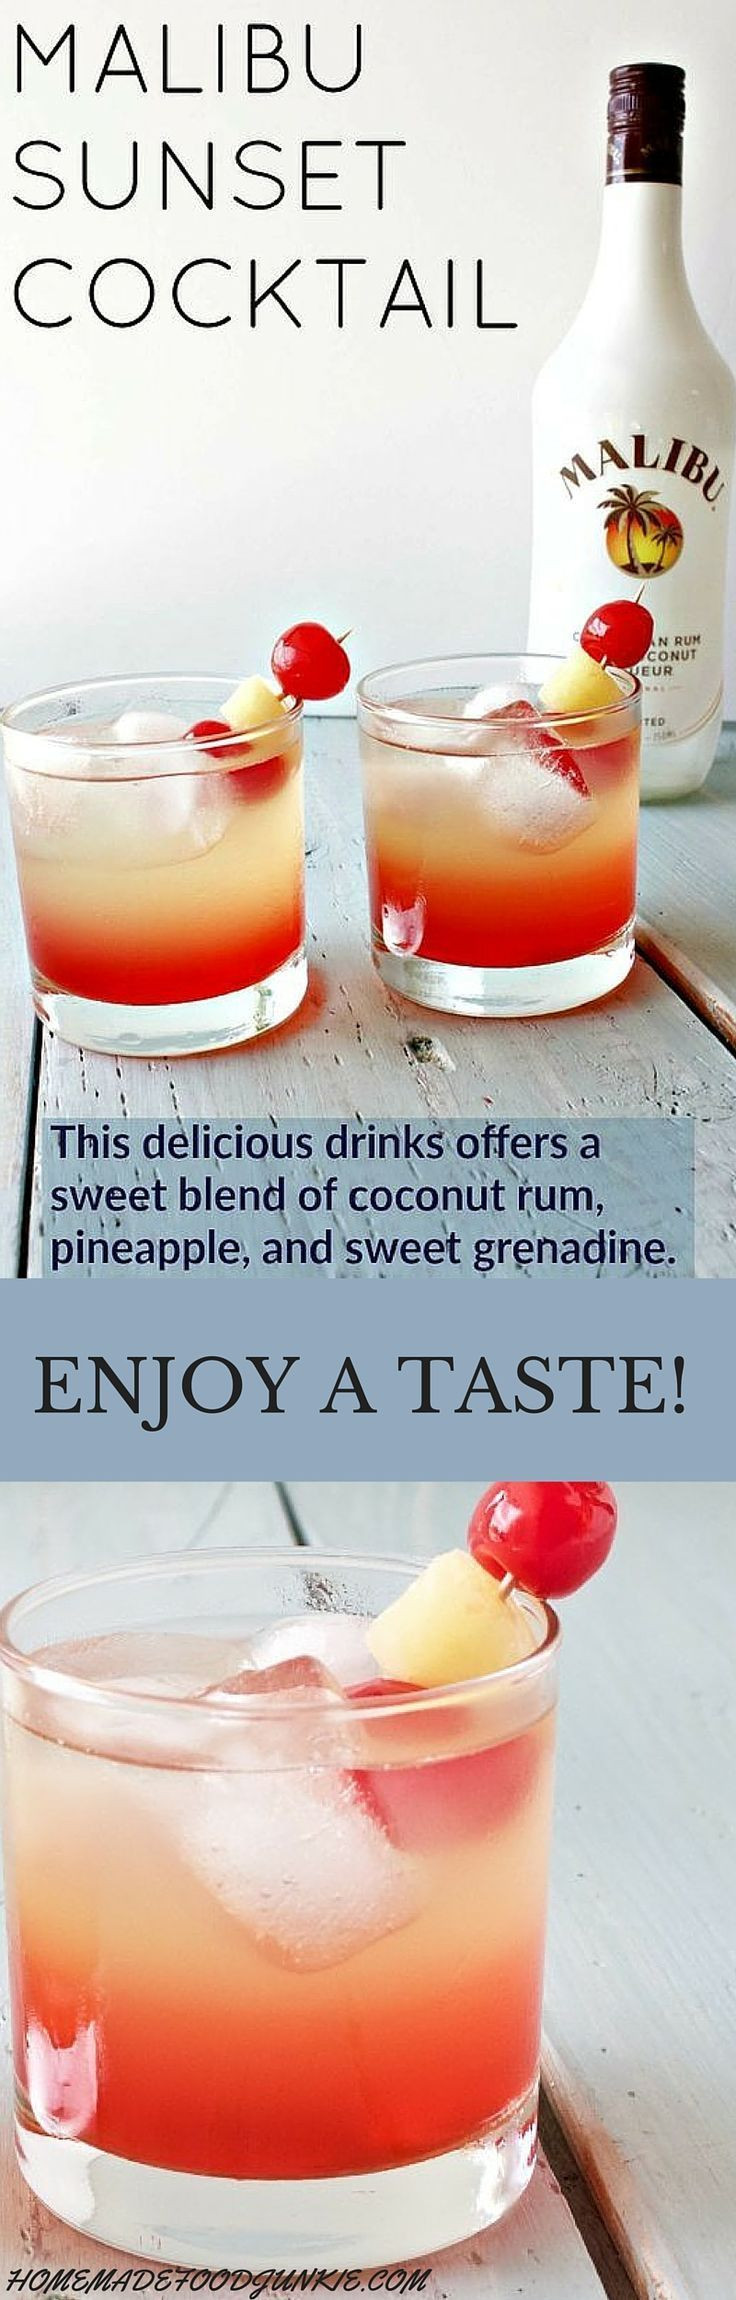 Drinks To Make With Coconut Rum
 44 best images about Malibu on Pinterest